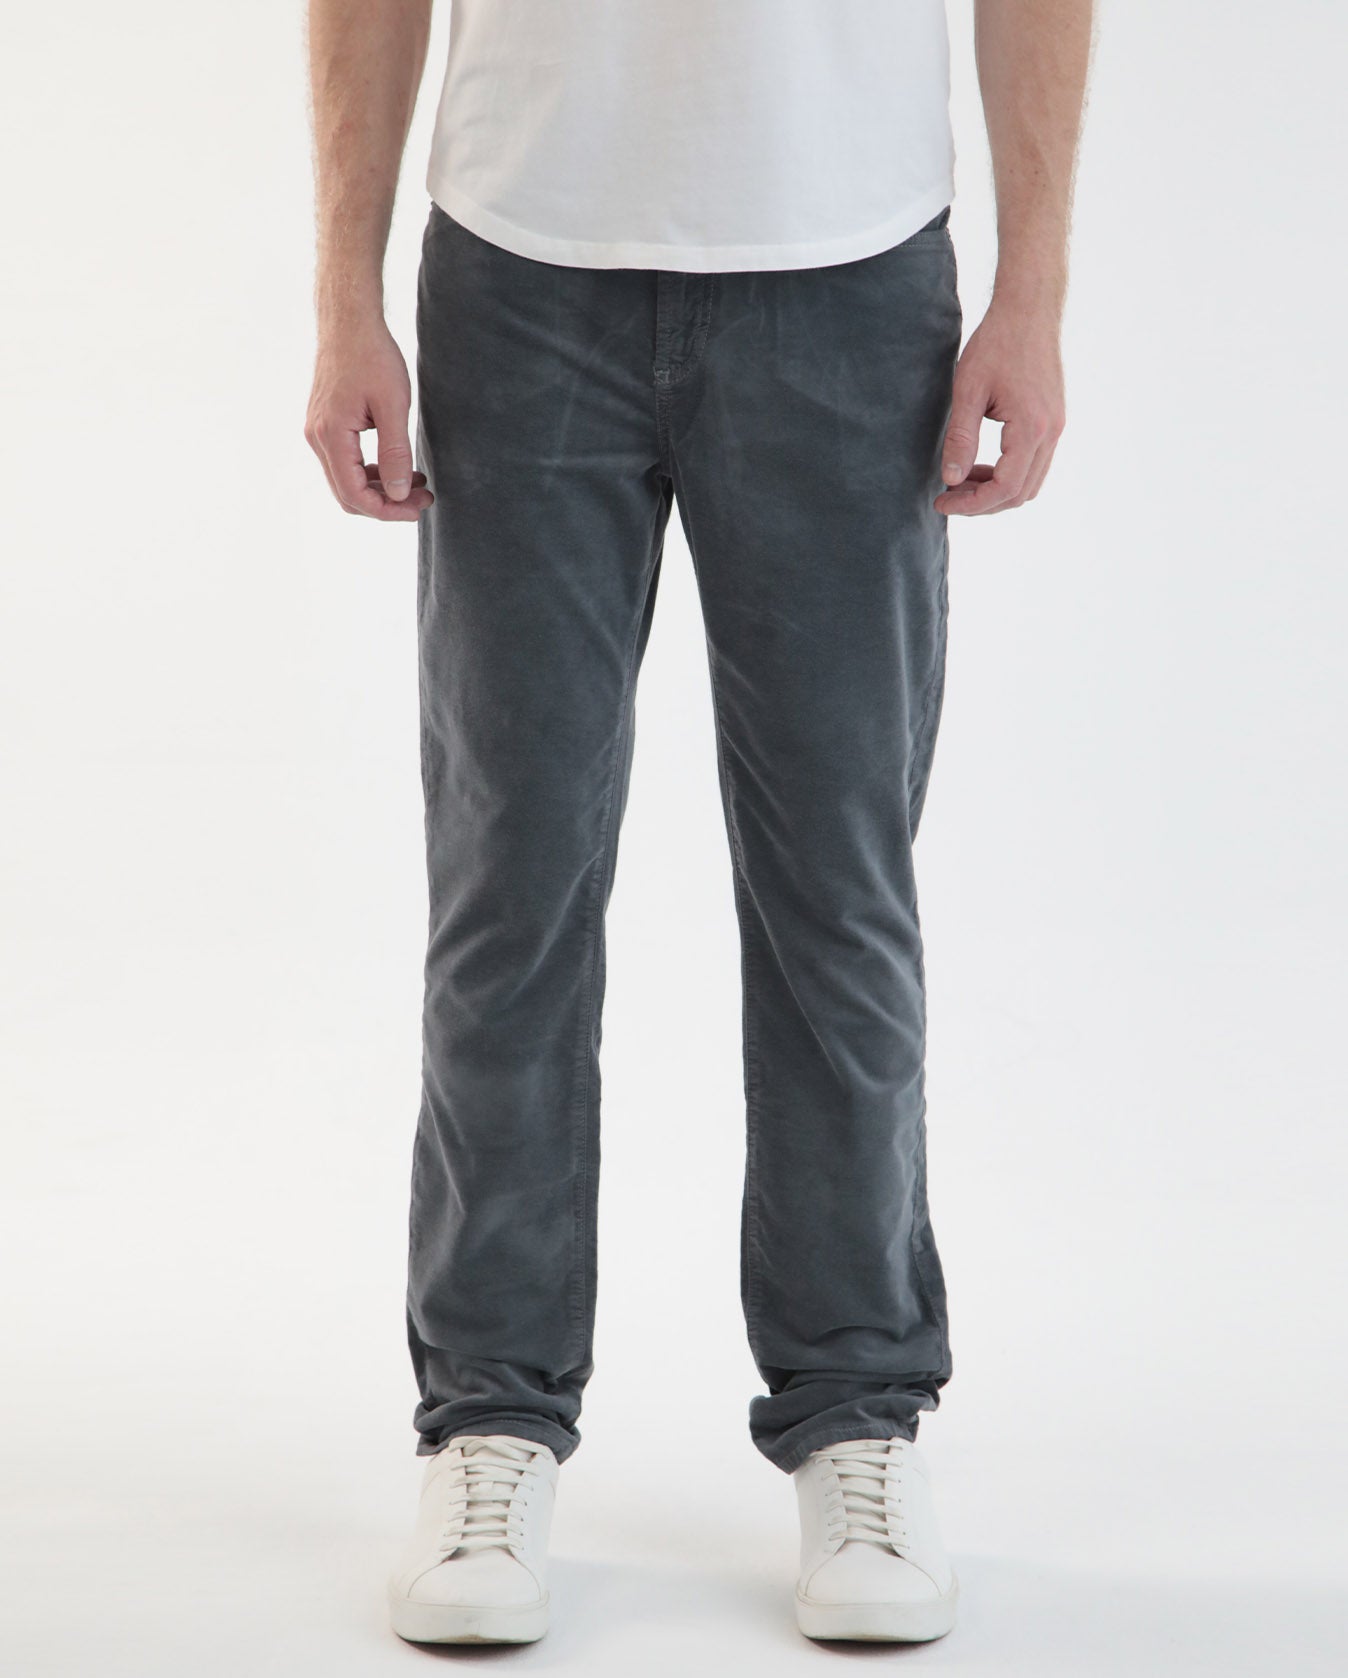 Our Legacy - Third Cut Loose Fit Jean - Twilight Attic Wash Pants | Size: 33 | Fred Segal